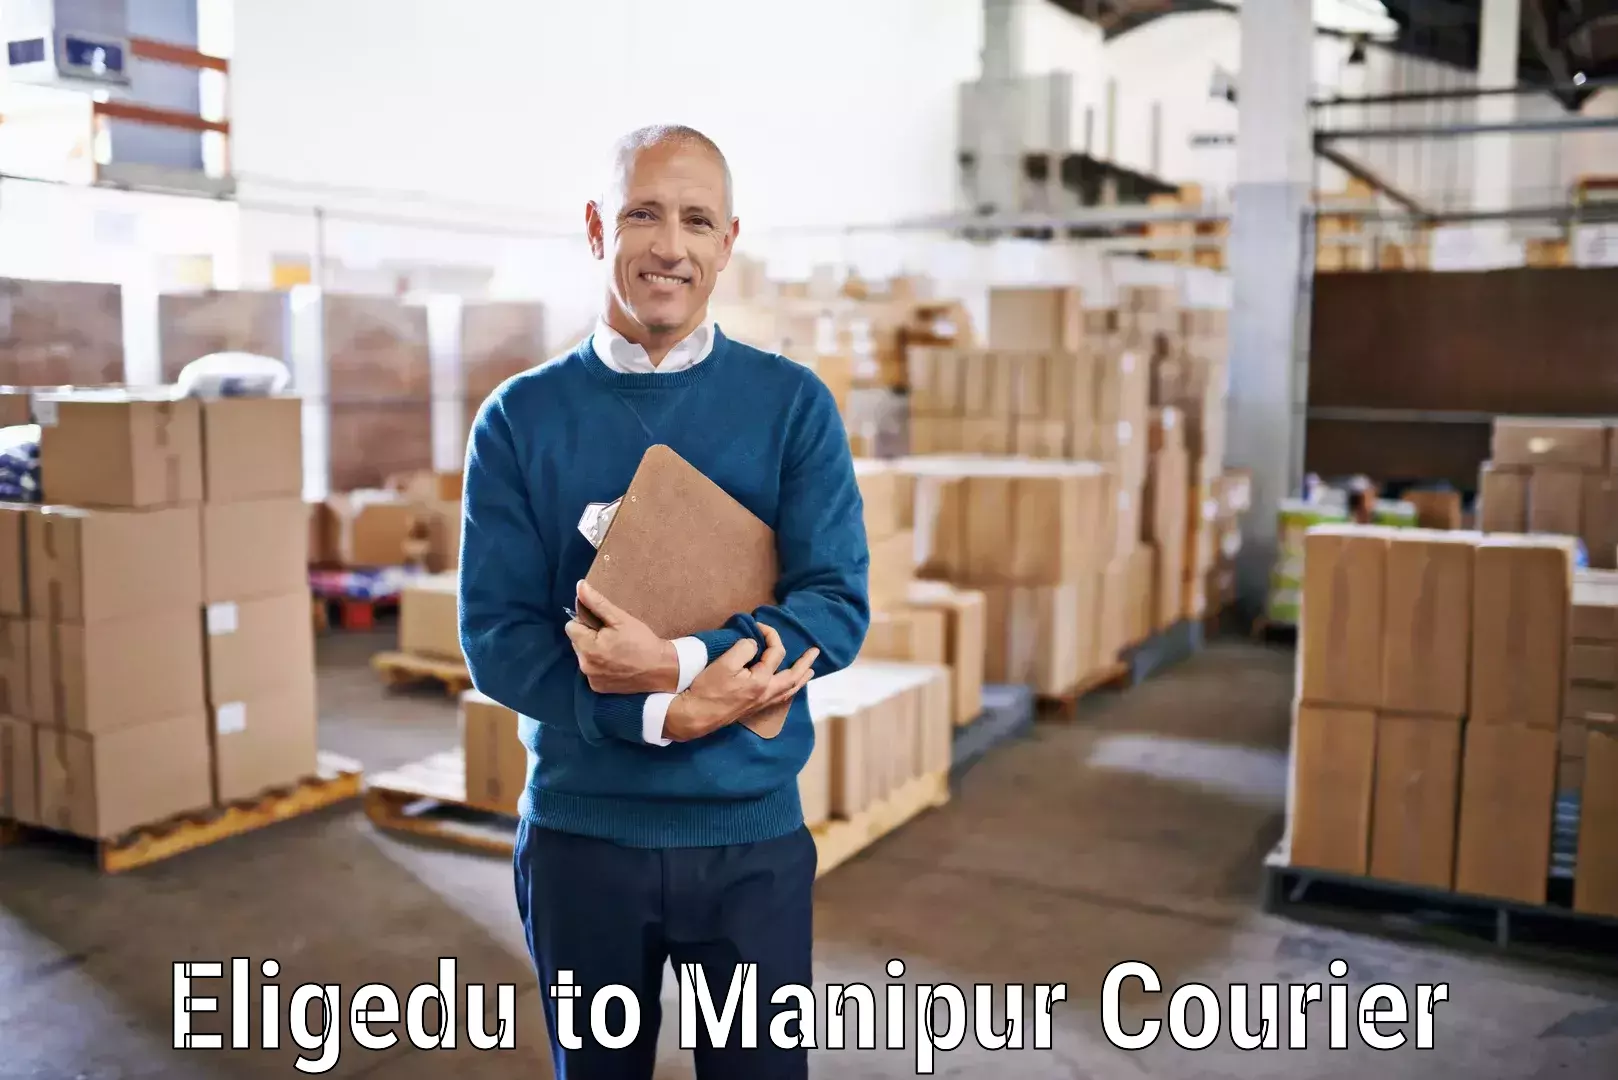 Full-service courier options Eligedu to Manipur